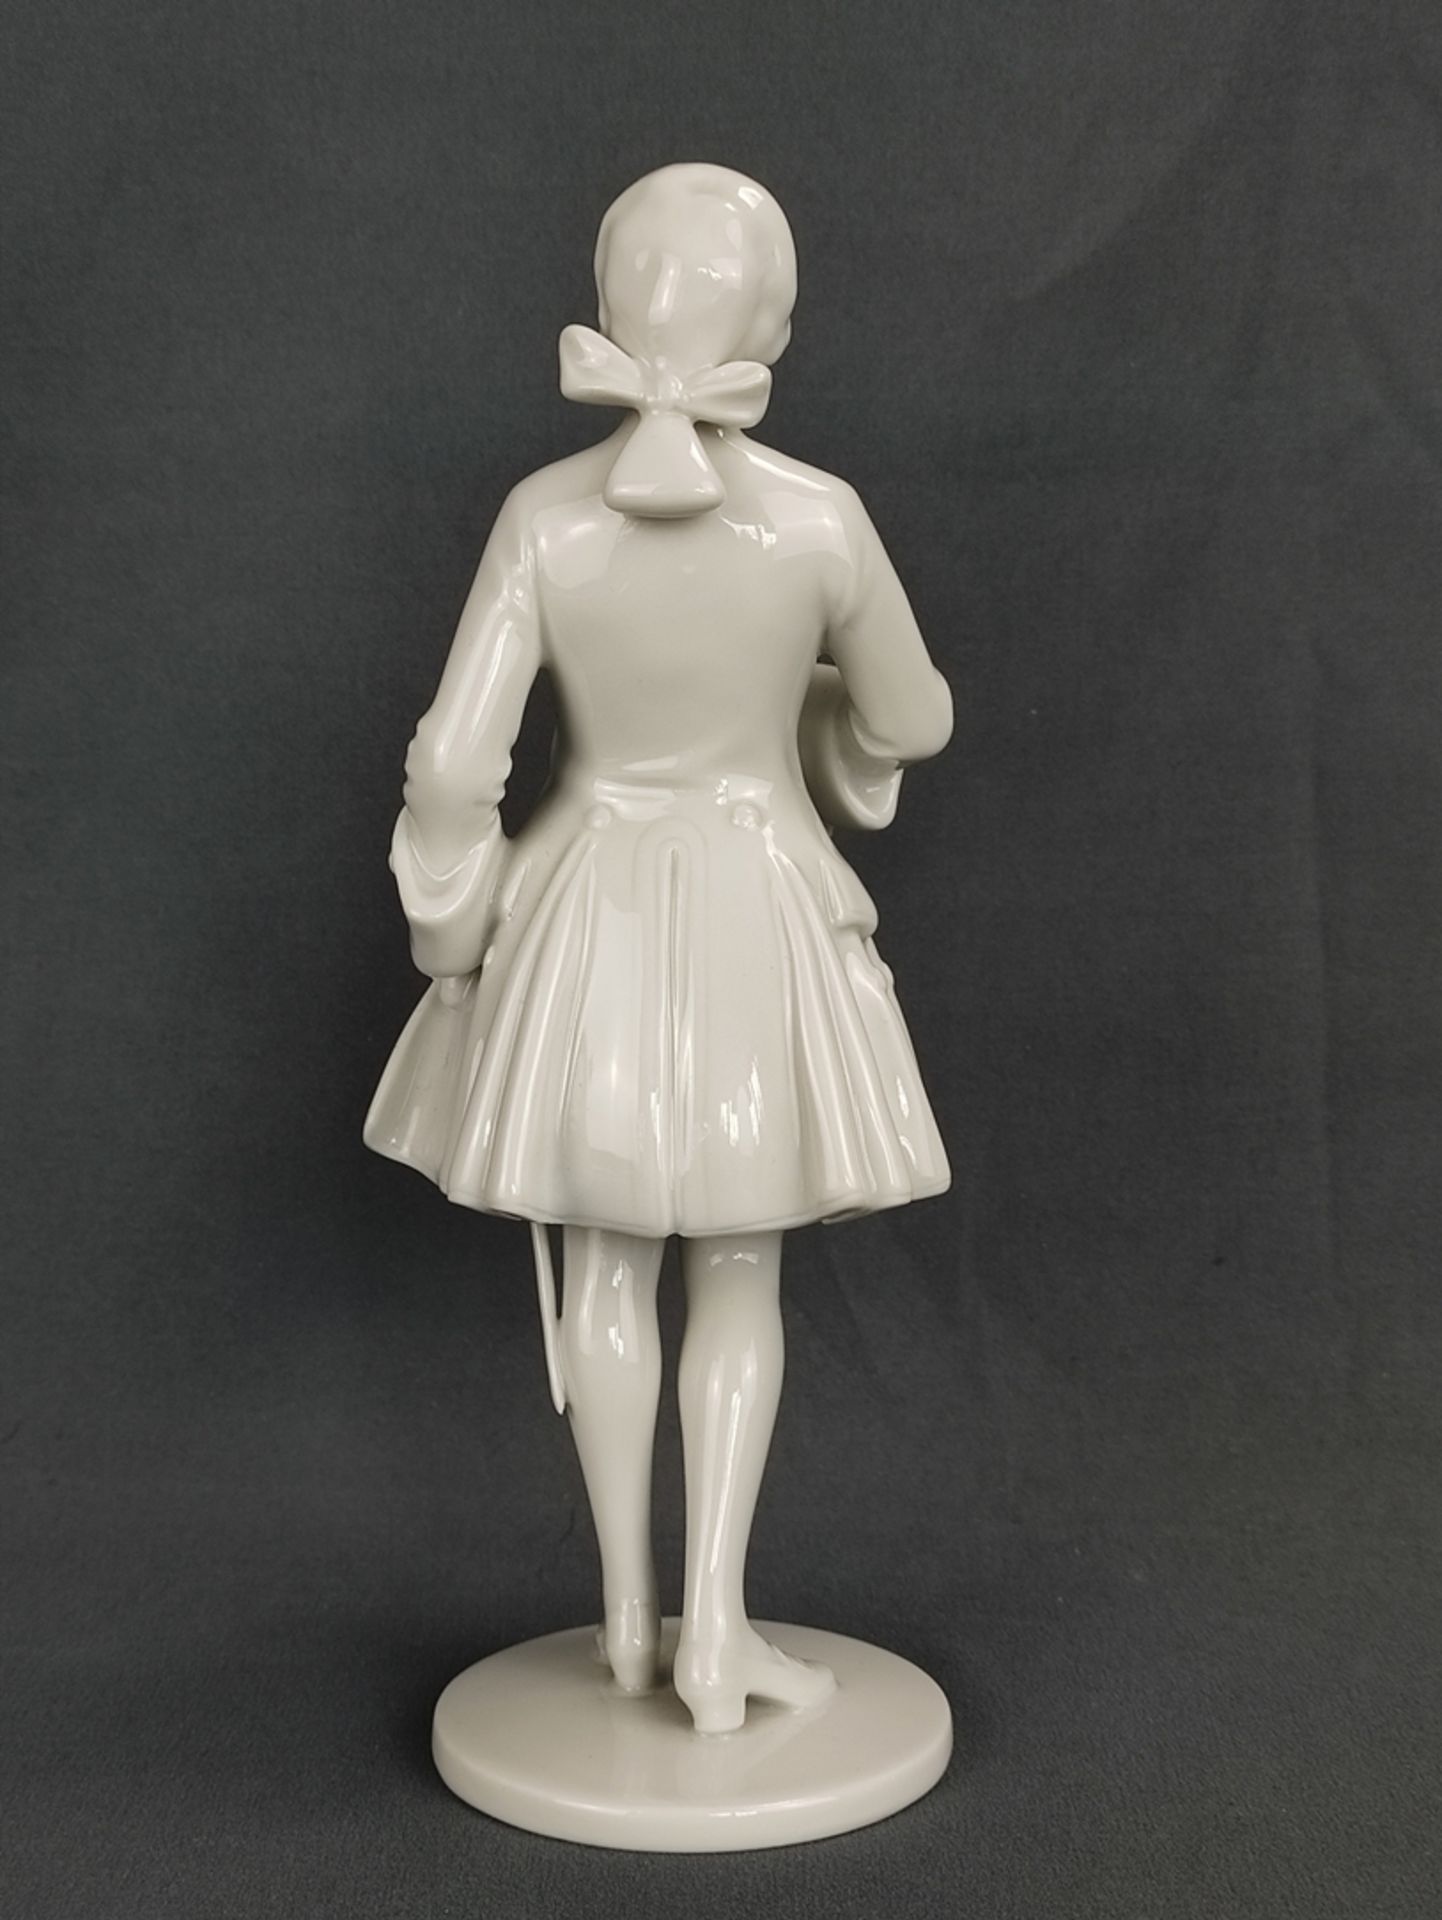 Cavalier, standing on disc stand with rose in hand, white porcelain, Augarten Vienna, embossed mark - Image 3 of 5